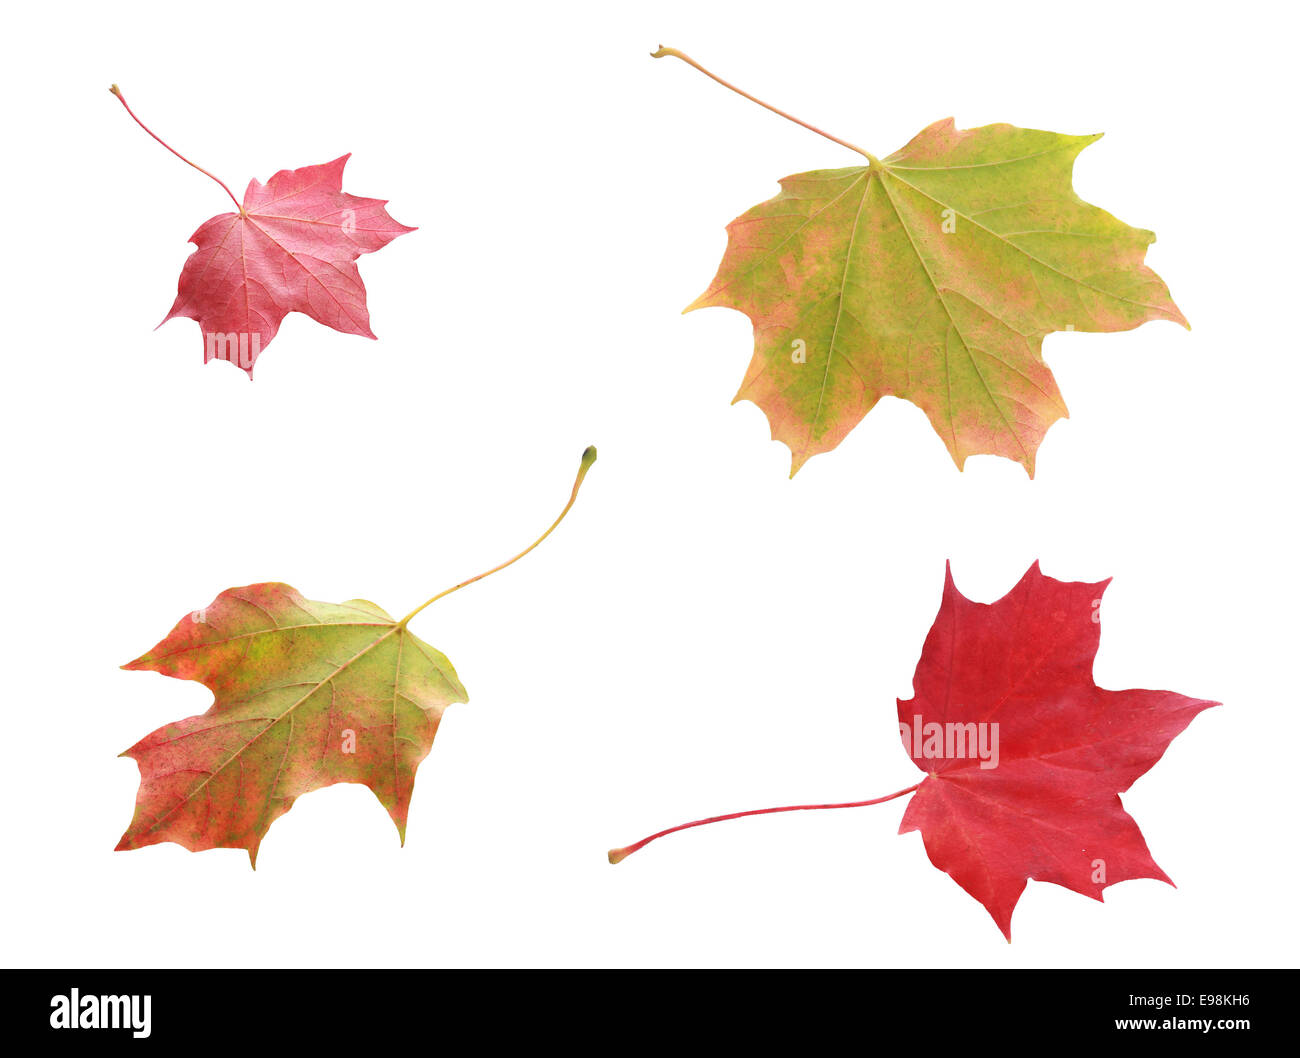 Four colorful variegated autumn leaves viewed from above and below in shades of red and green showing the changing colors with the change in season, isolated on white Stock Photo